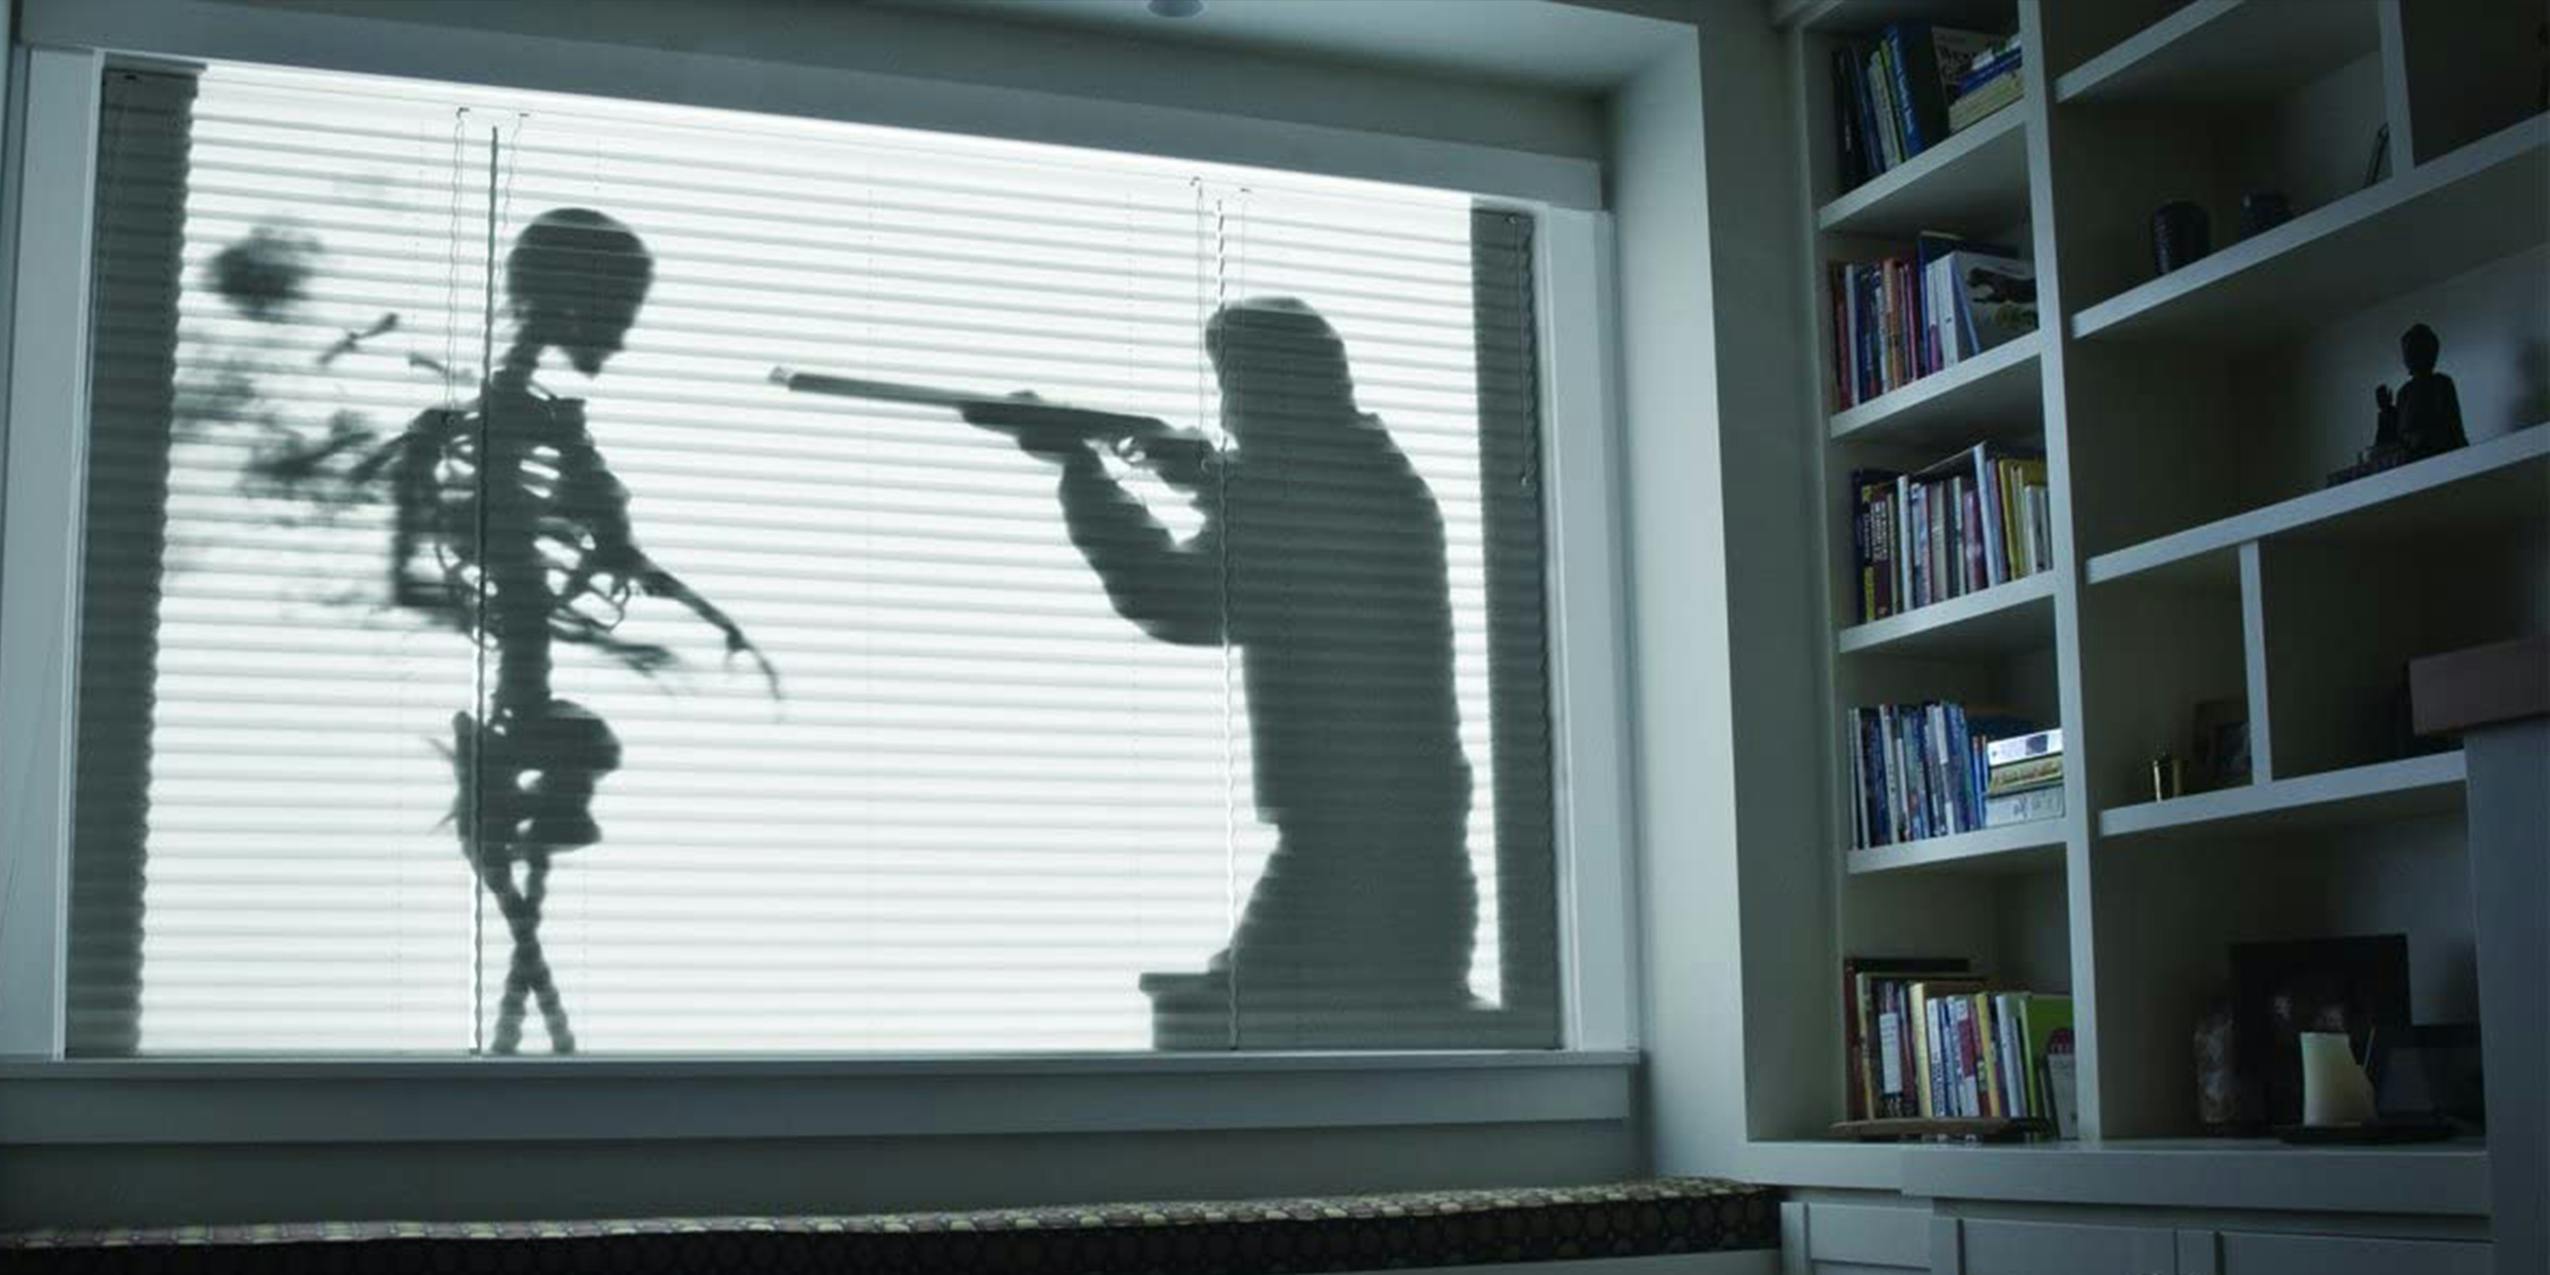 Man shooting skeleton from Shades of Evil AtmosFX DVD projected onto window blinds